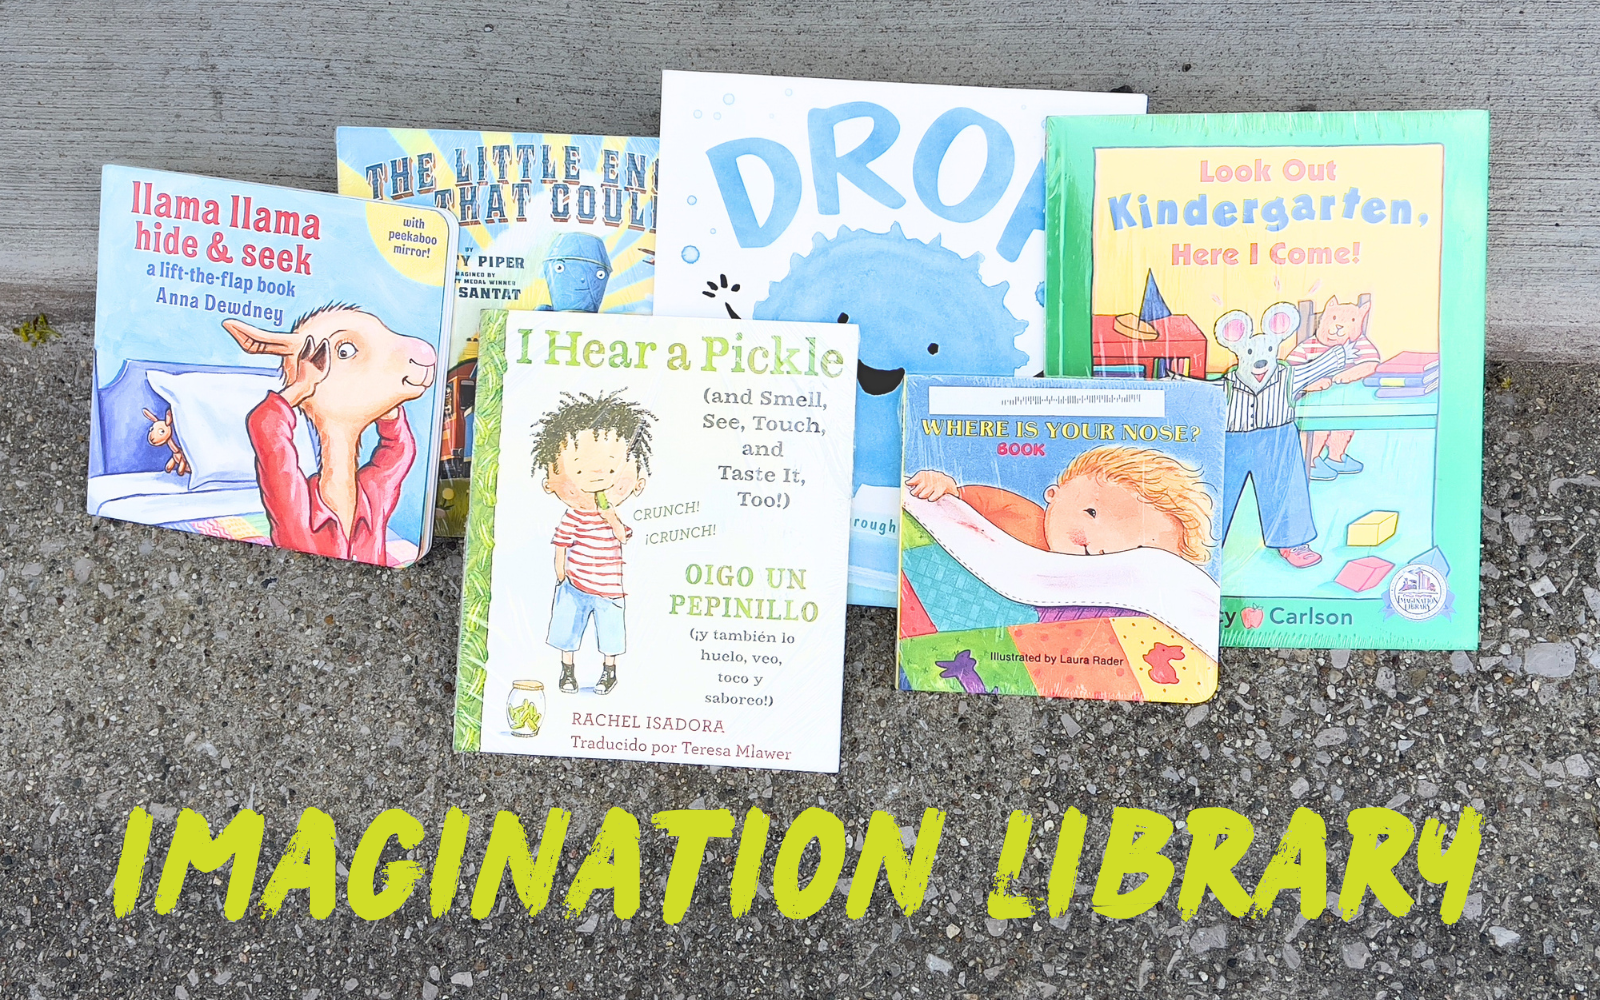 Imagination Library Mails Free Books to Kids thumbnail